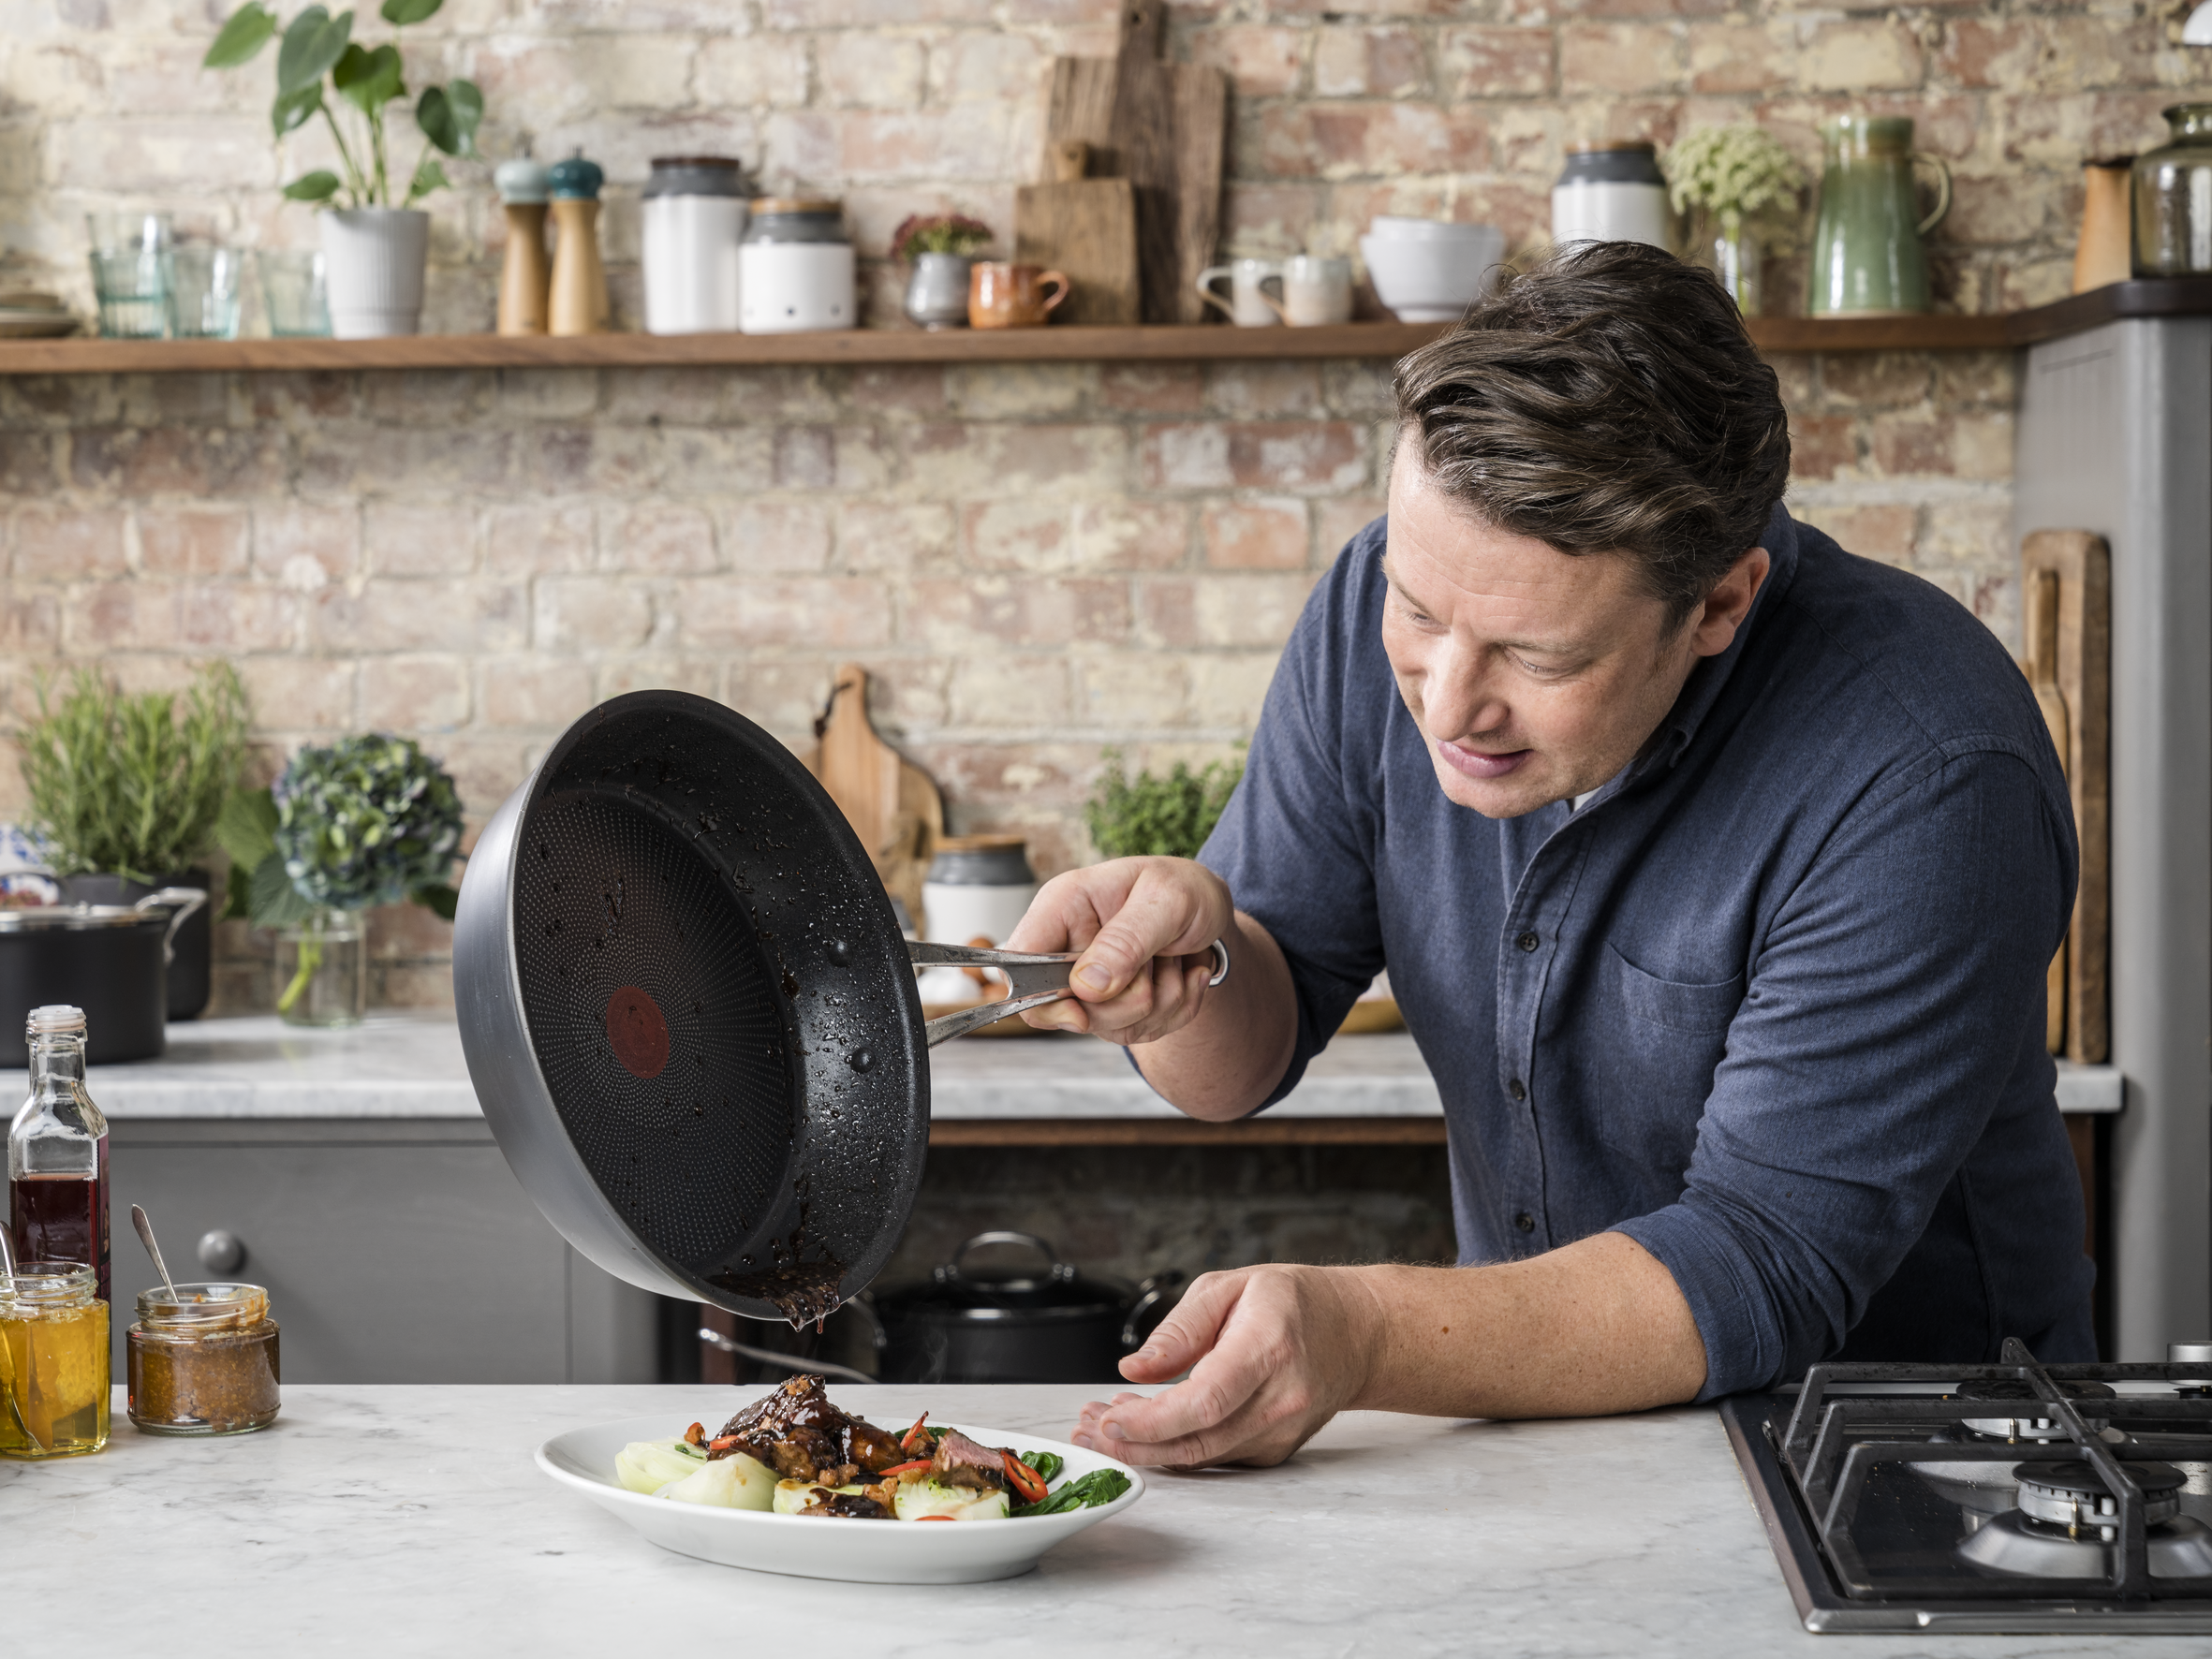 Jamie Oliver by Tefal Cooks Classic Non-Stick Induction Hard Anodised Twinpack Frypan Set 24/28cm